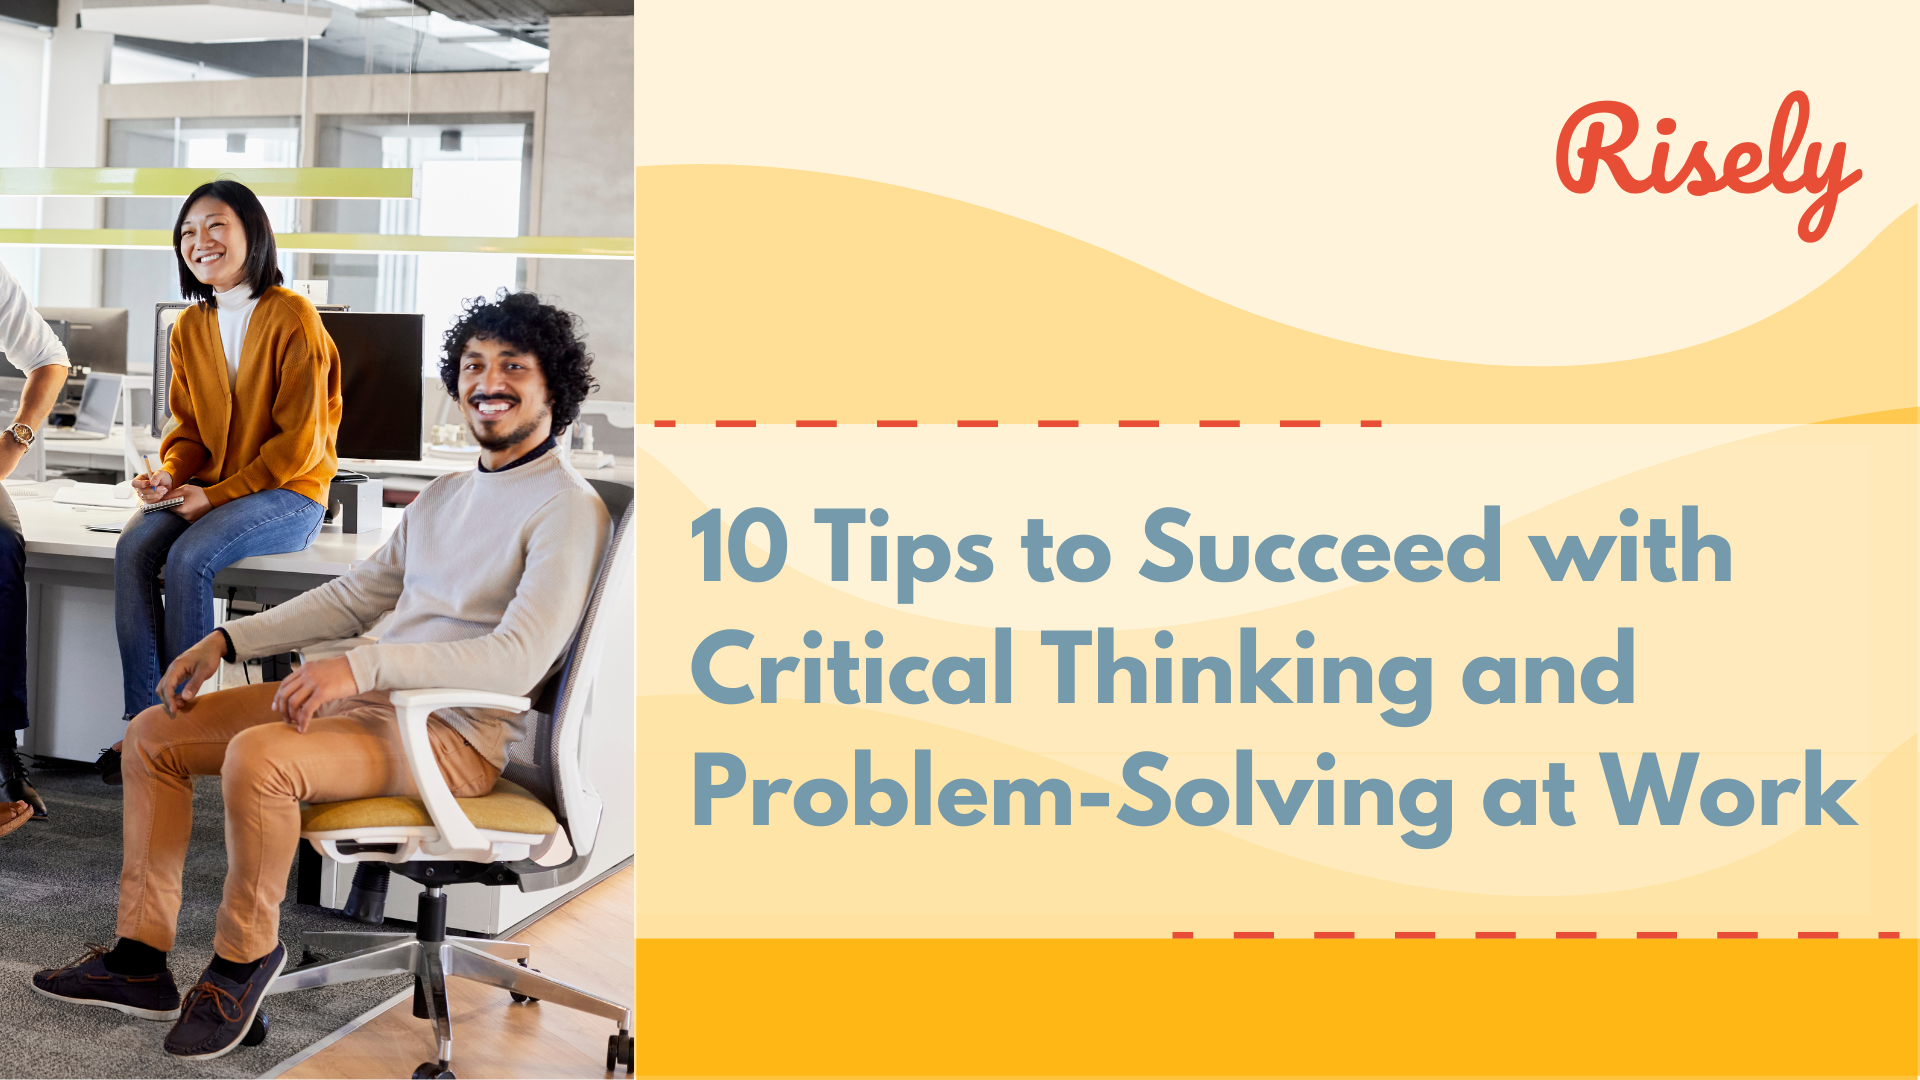 Critical Thinking and Problem-Solving at Work